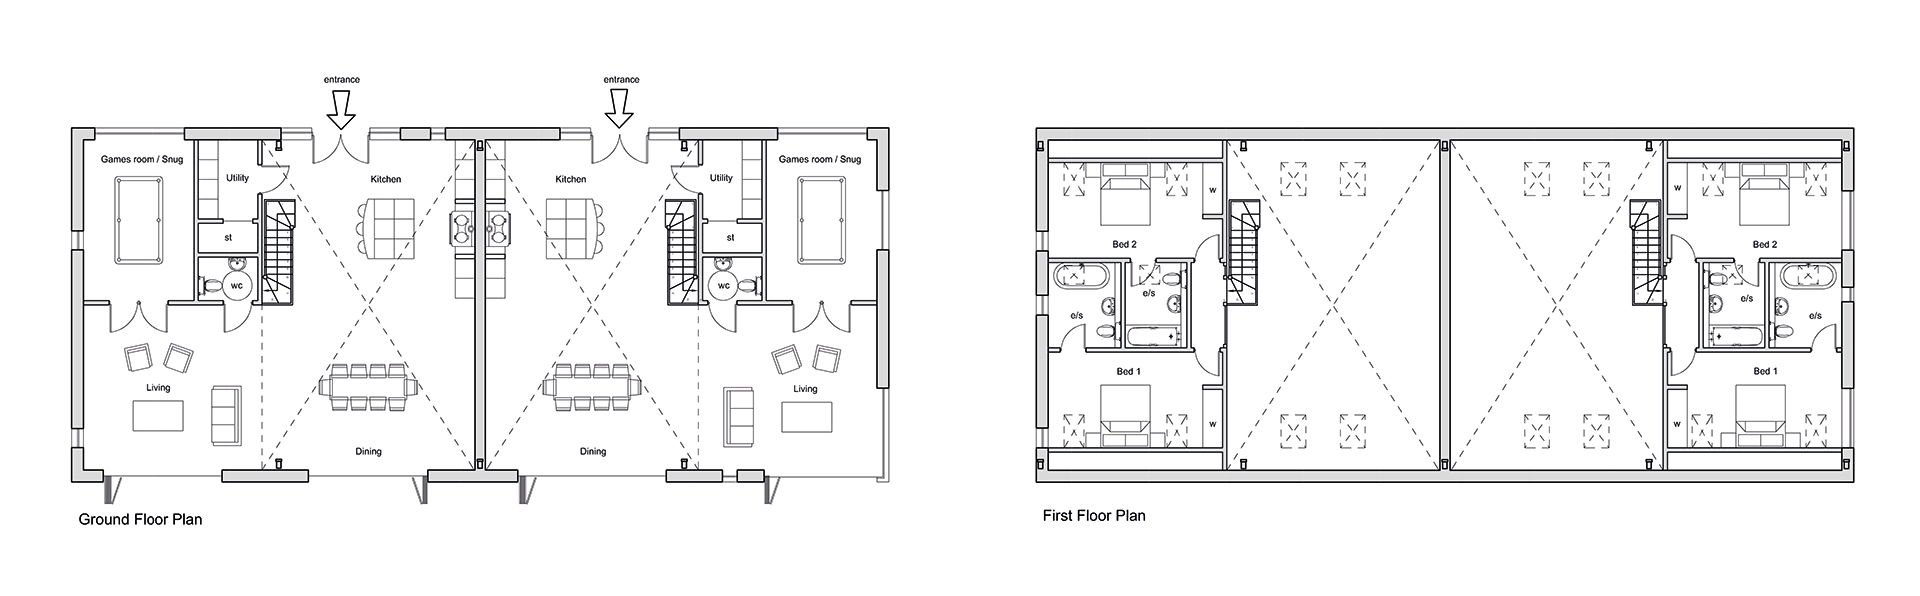 floor plan of class q agricultural building